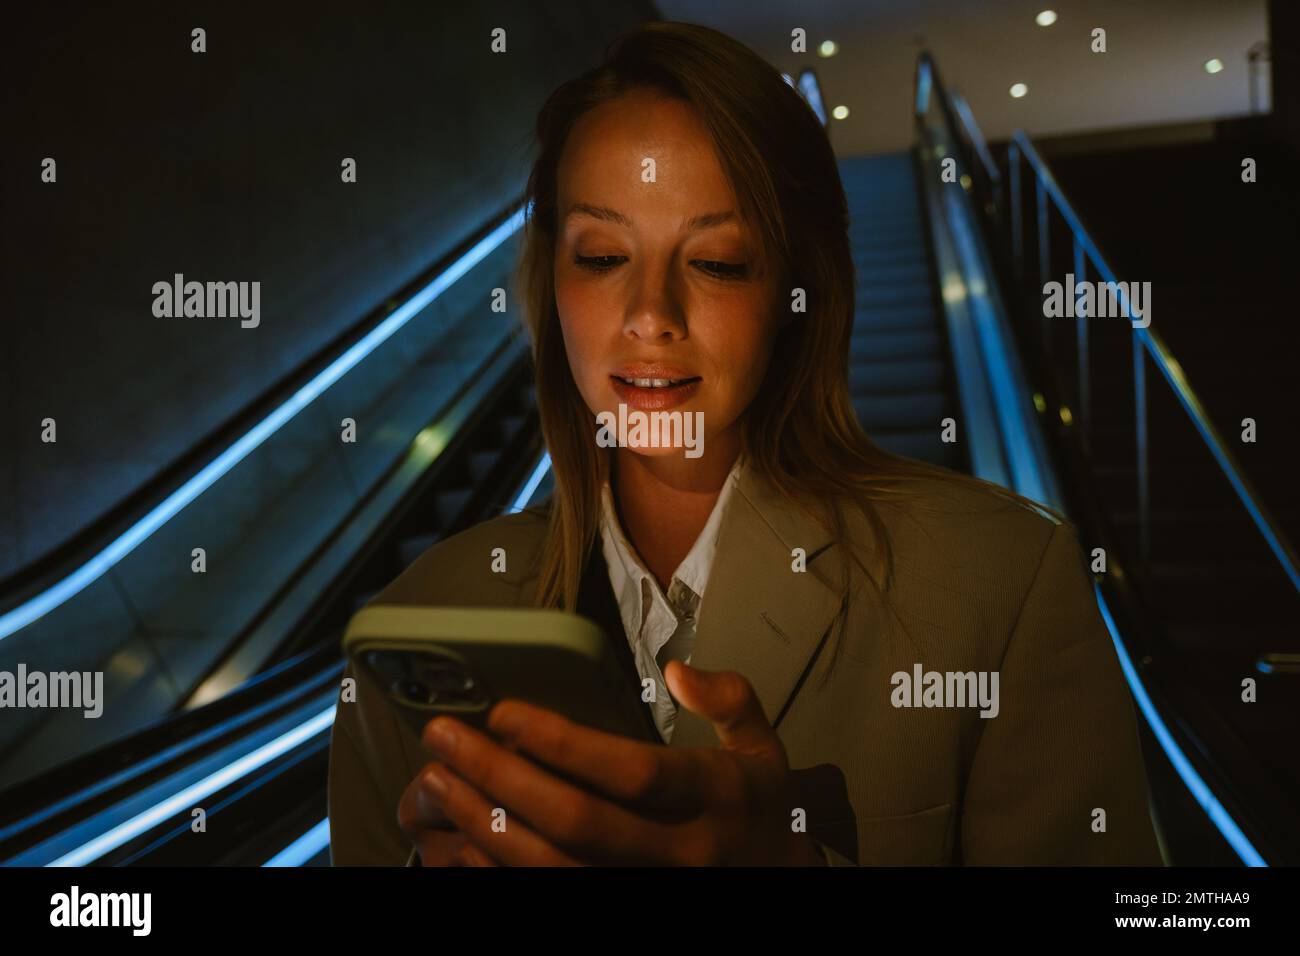 Portrait of young focused woman holding and using her phone, while standing in darkness on the escalator Stock Photo